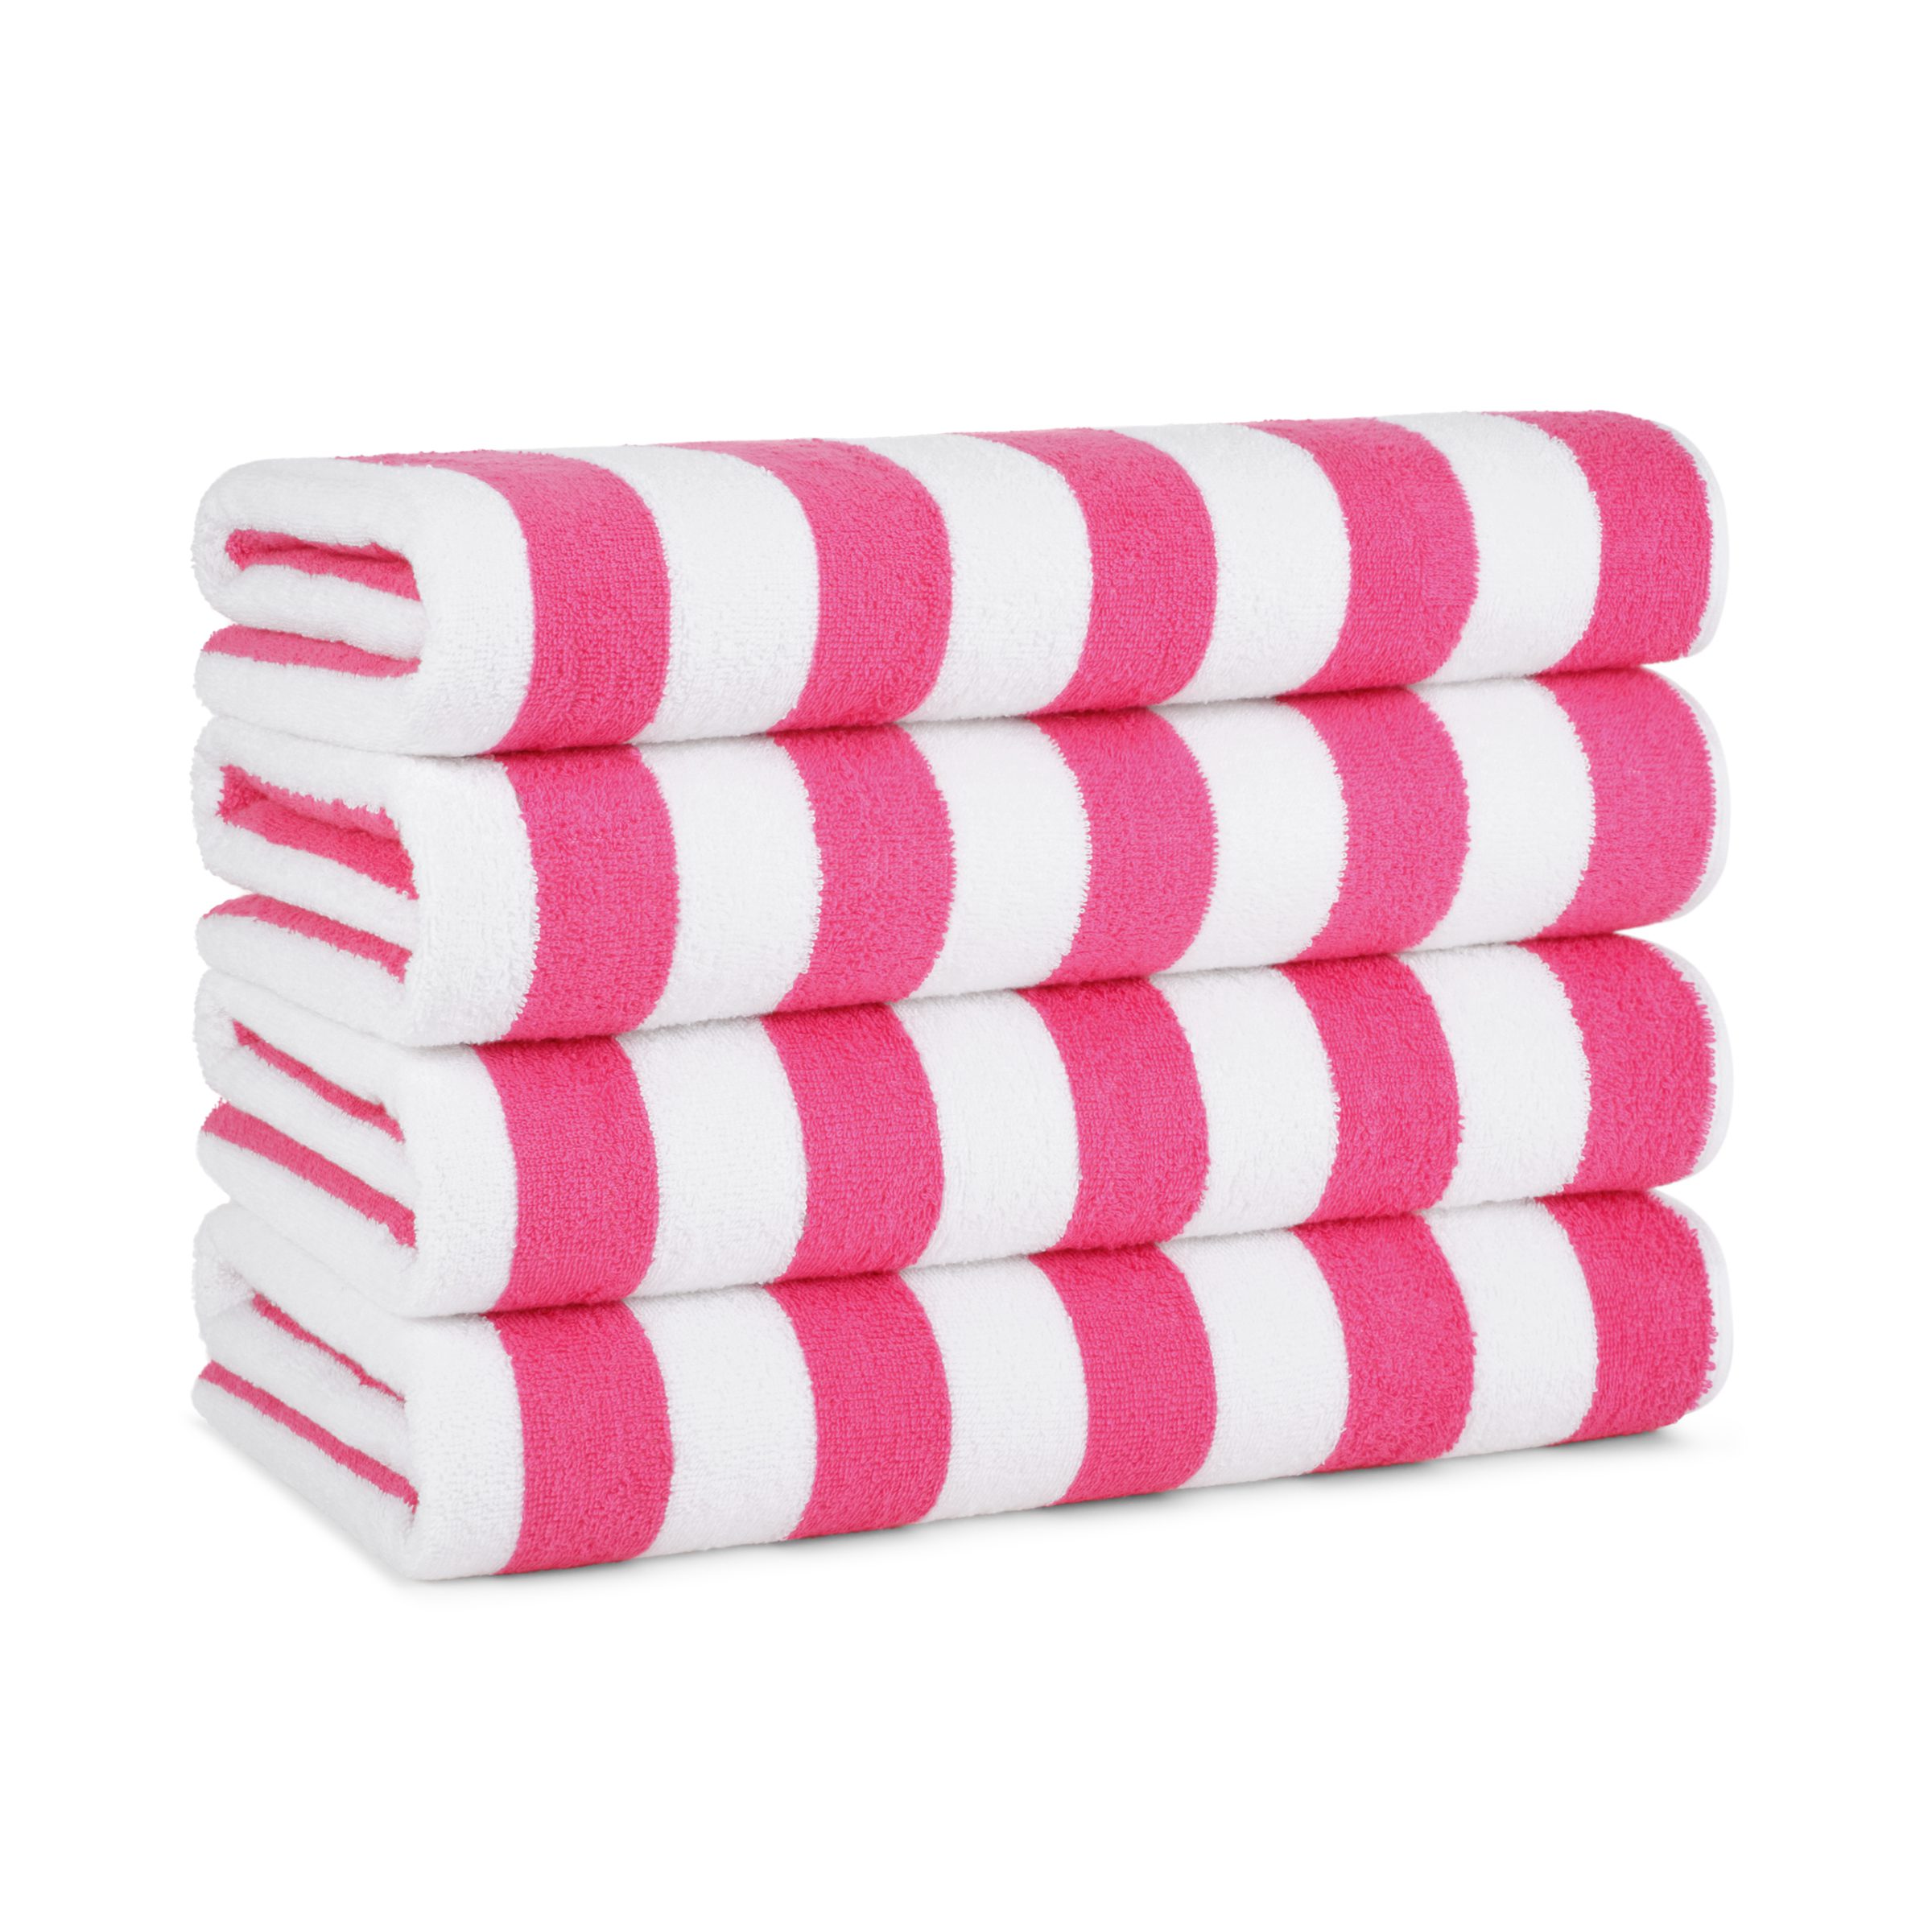 Dropship 100% Cotton 8 Piece Antimicrobial Towel Set to Sell Online at a  Lower Price